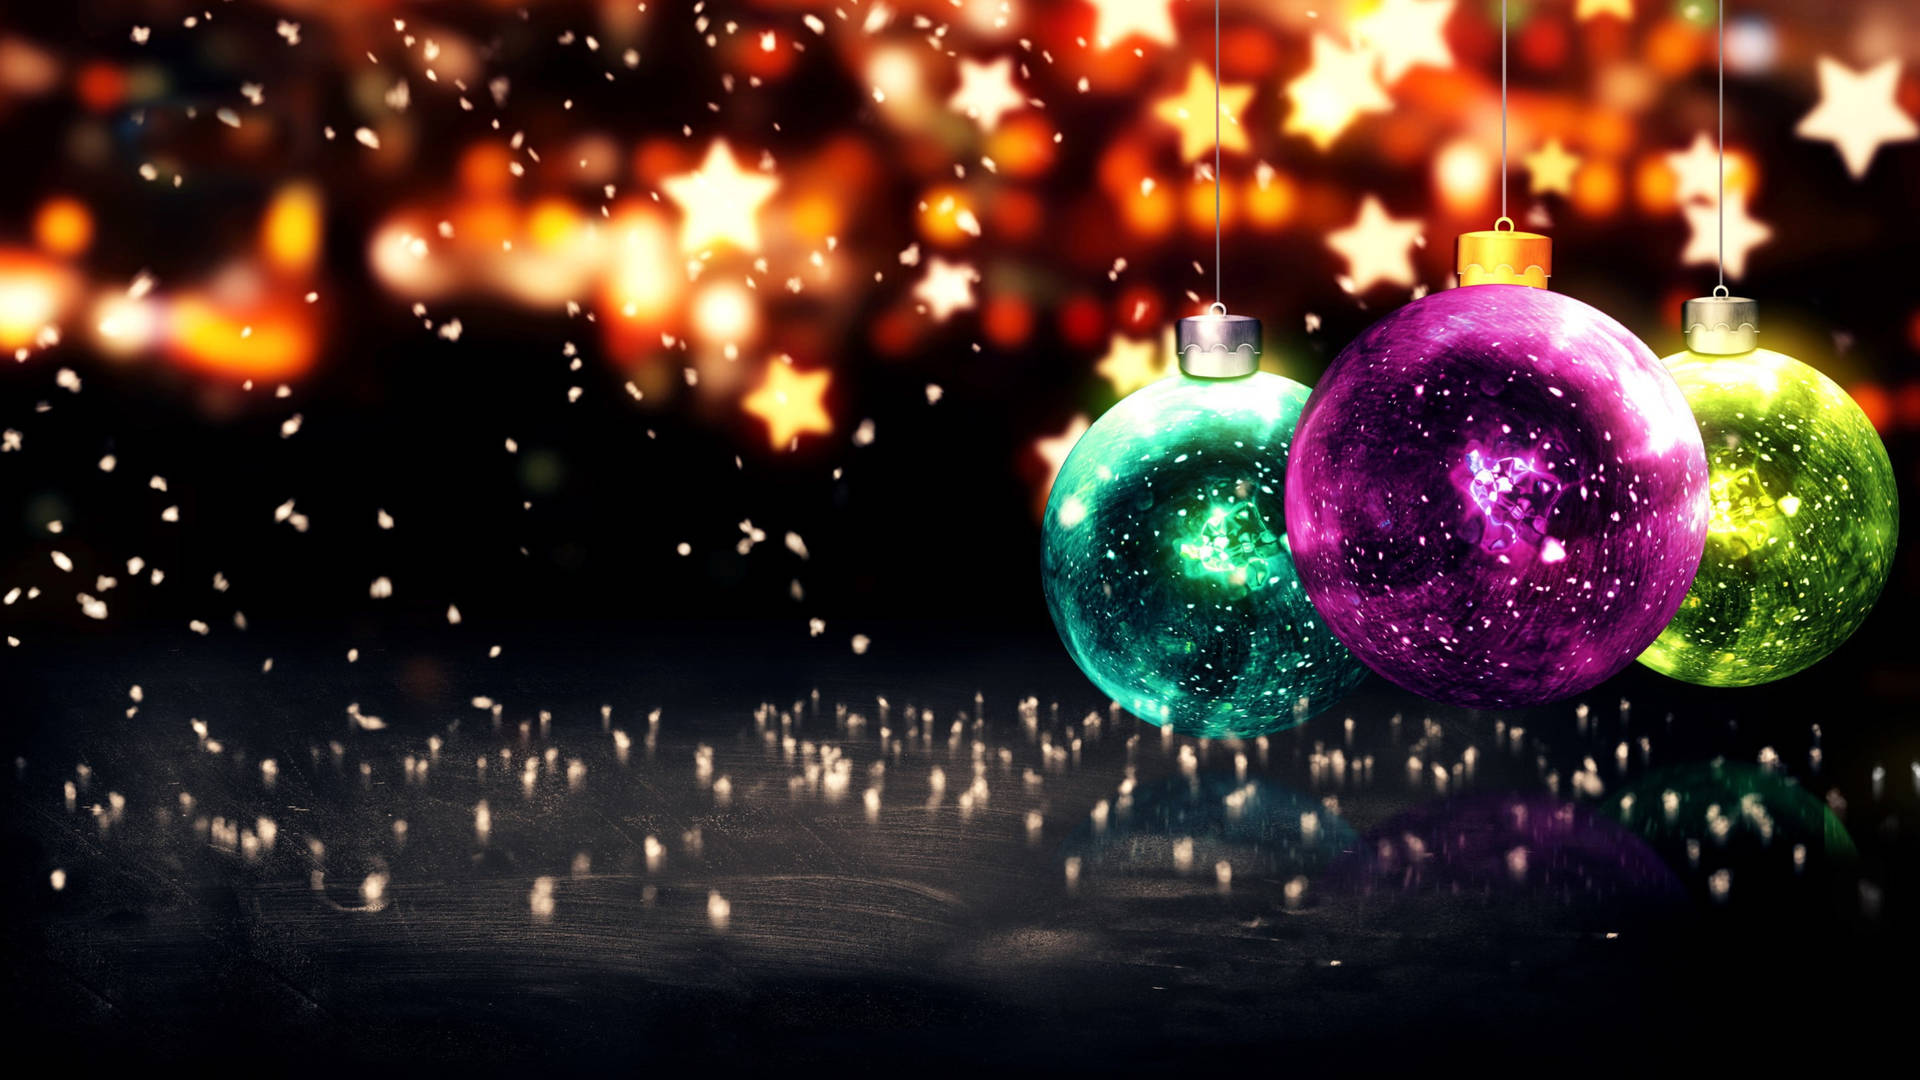 Starry Colorful Christmas Balls Wallpaper